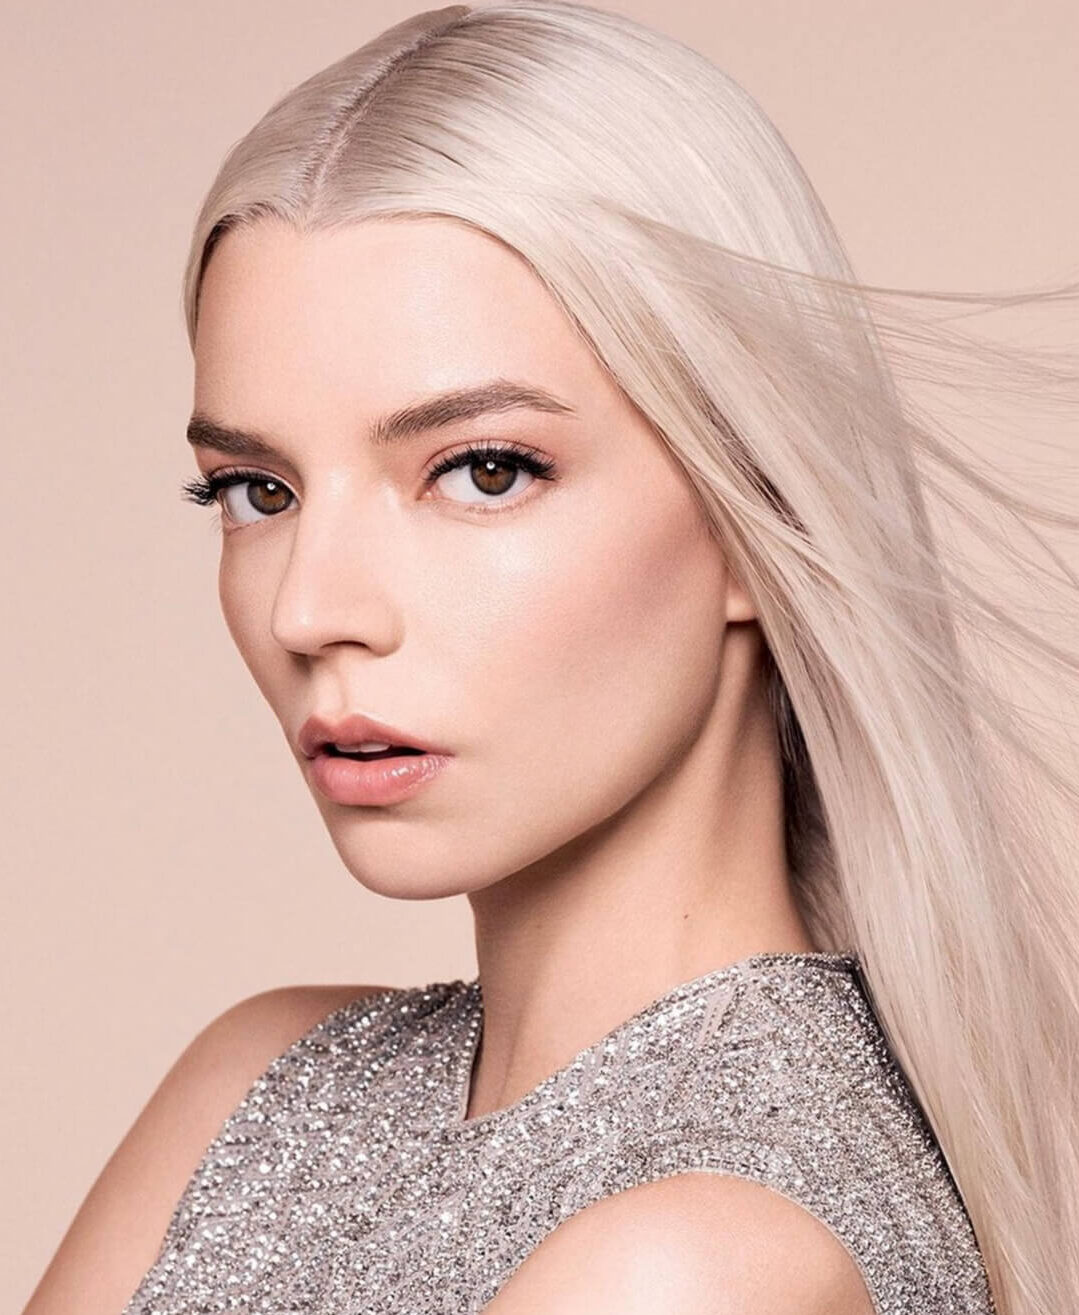 Anya Taylor-Joy, known for her Golden Globe-winning role in the miniseries "The Queen's Gambit" and films like "Split" and "The Menu," has garnered worldwide attention for her exceptional acting skills.